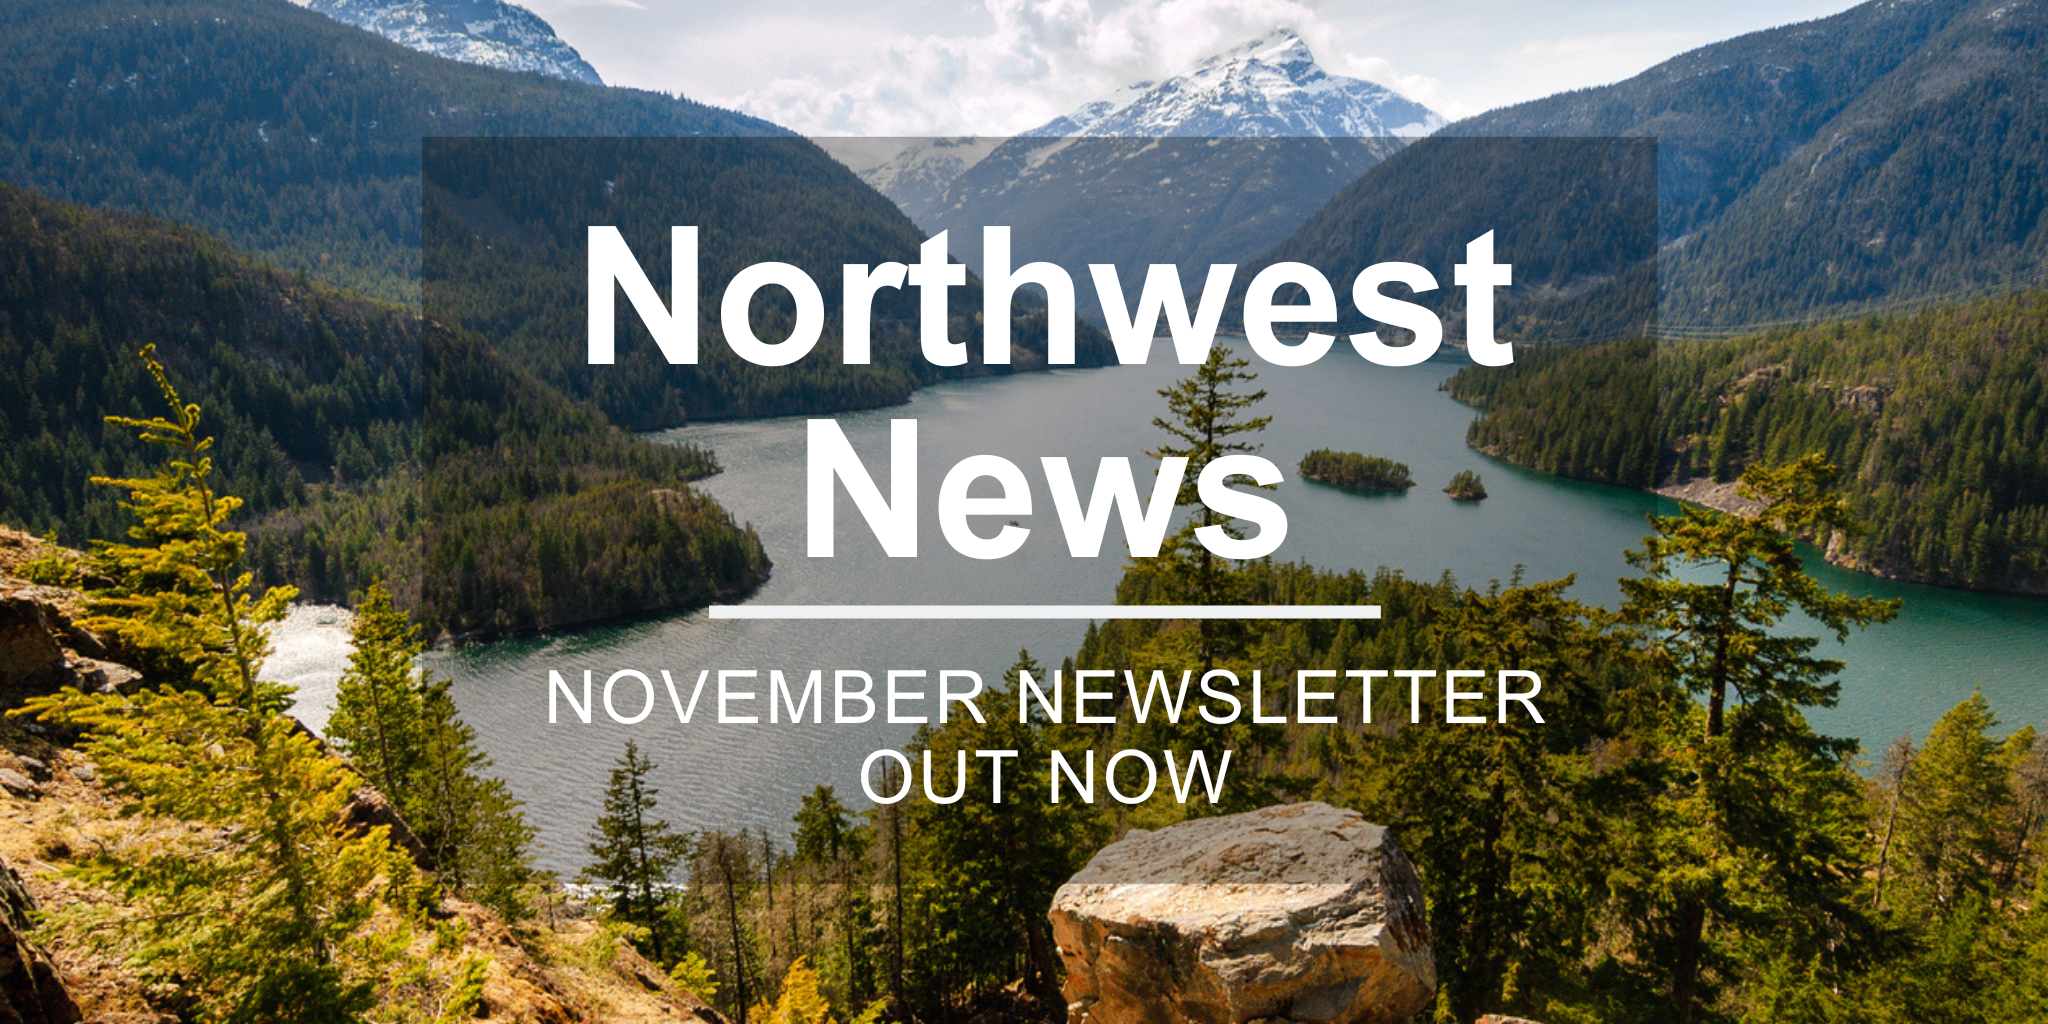 Decorative Image with the text Northwest News: November Newsletter Out Now